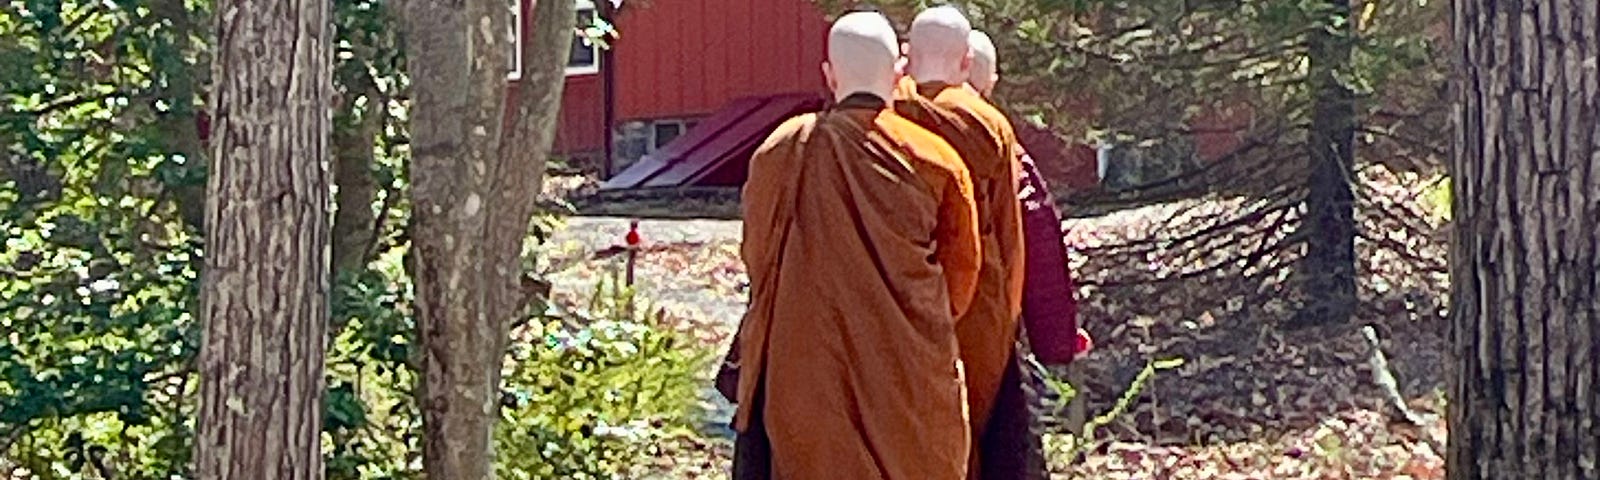 Three Buddhist nuns dressed in saffron robes with shaved heads walking on a gravel path, seen from the back.